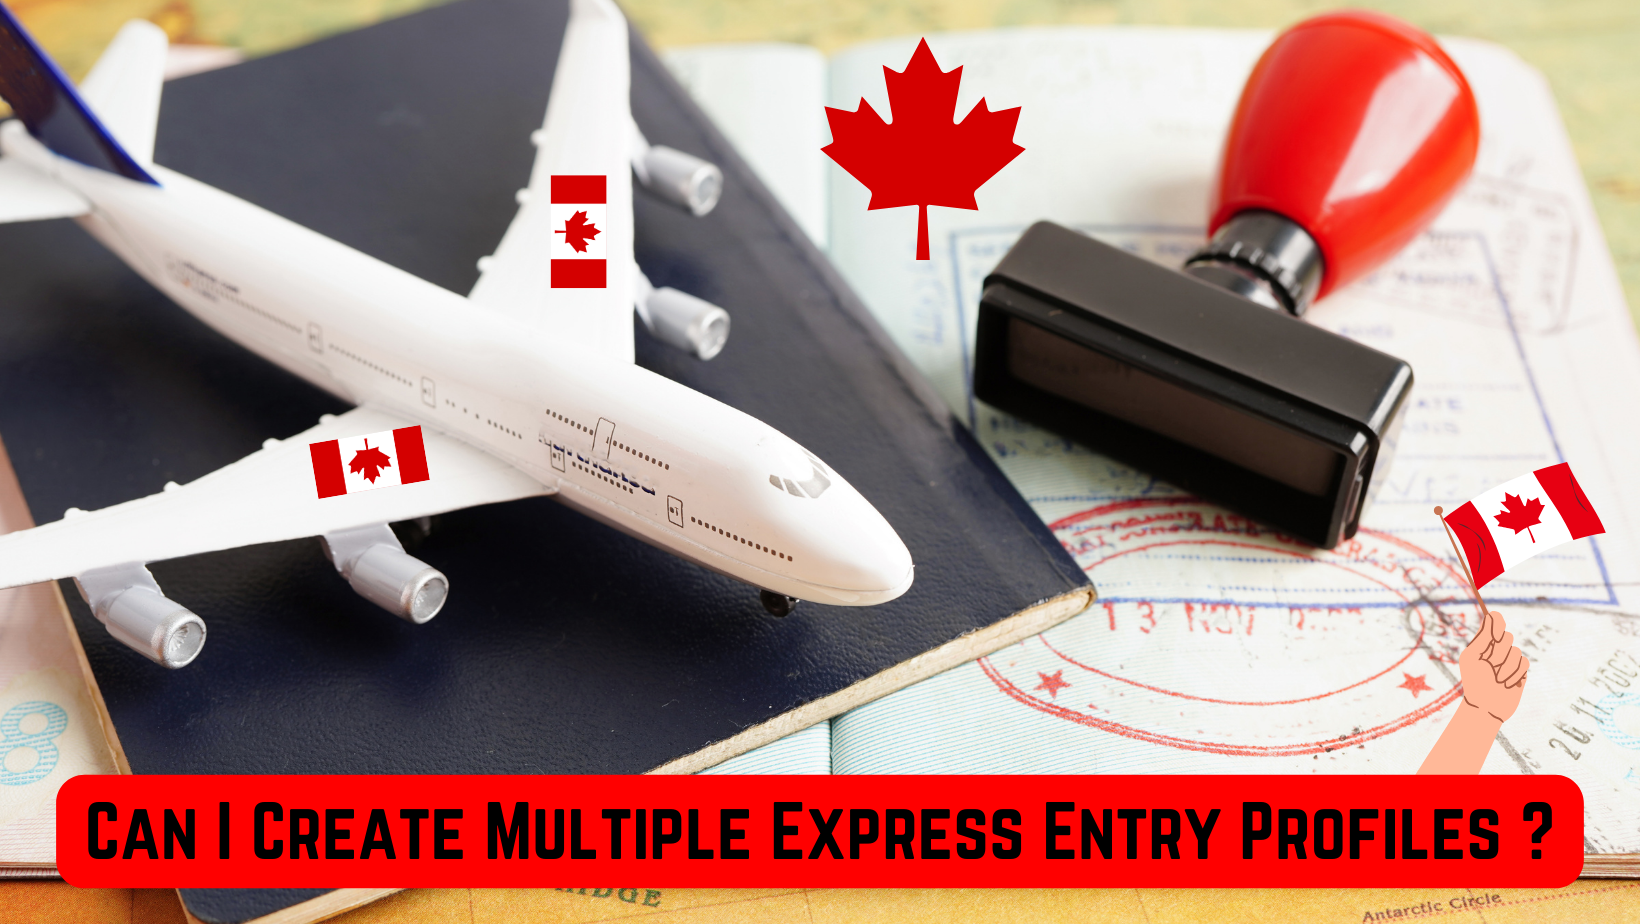 Am-I-allowed-to-Create-Multiple-Canadian-Express-Entry-Profiles for Canada Immigration purposes.